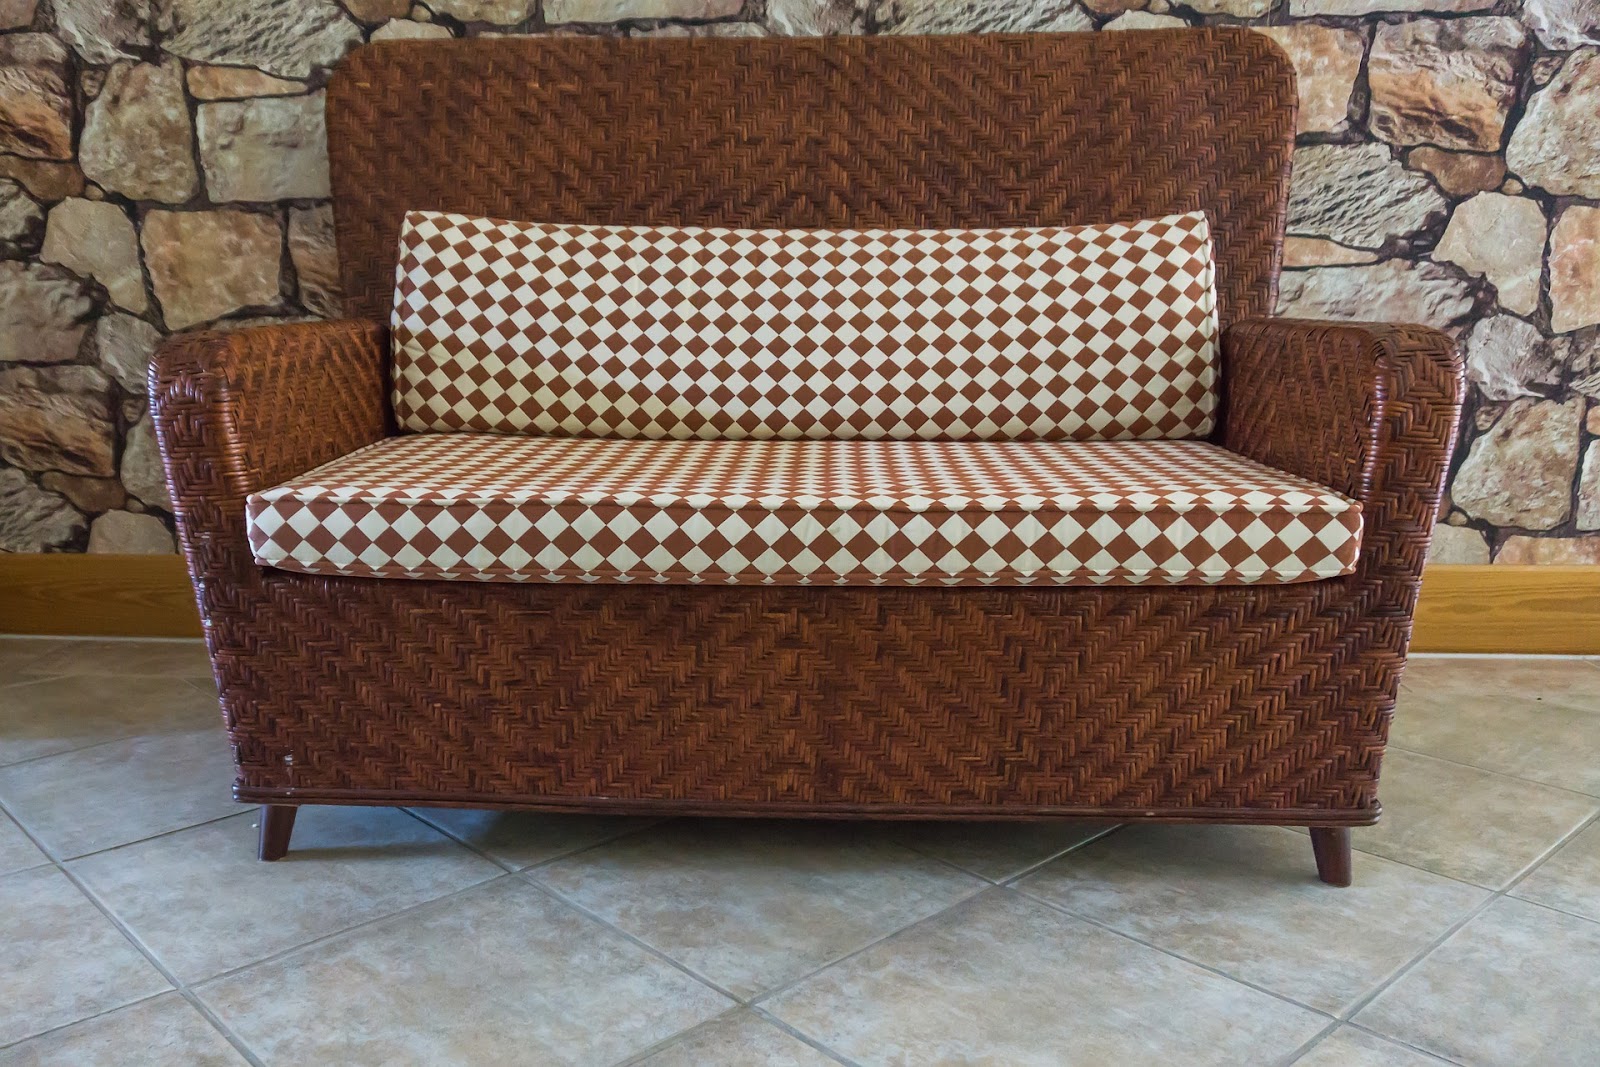 Rattan & Wicker Furniture Guide- Answers to FAQs